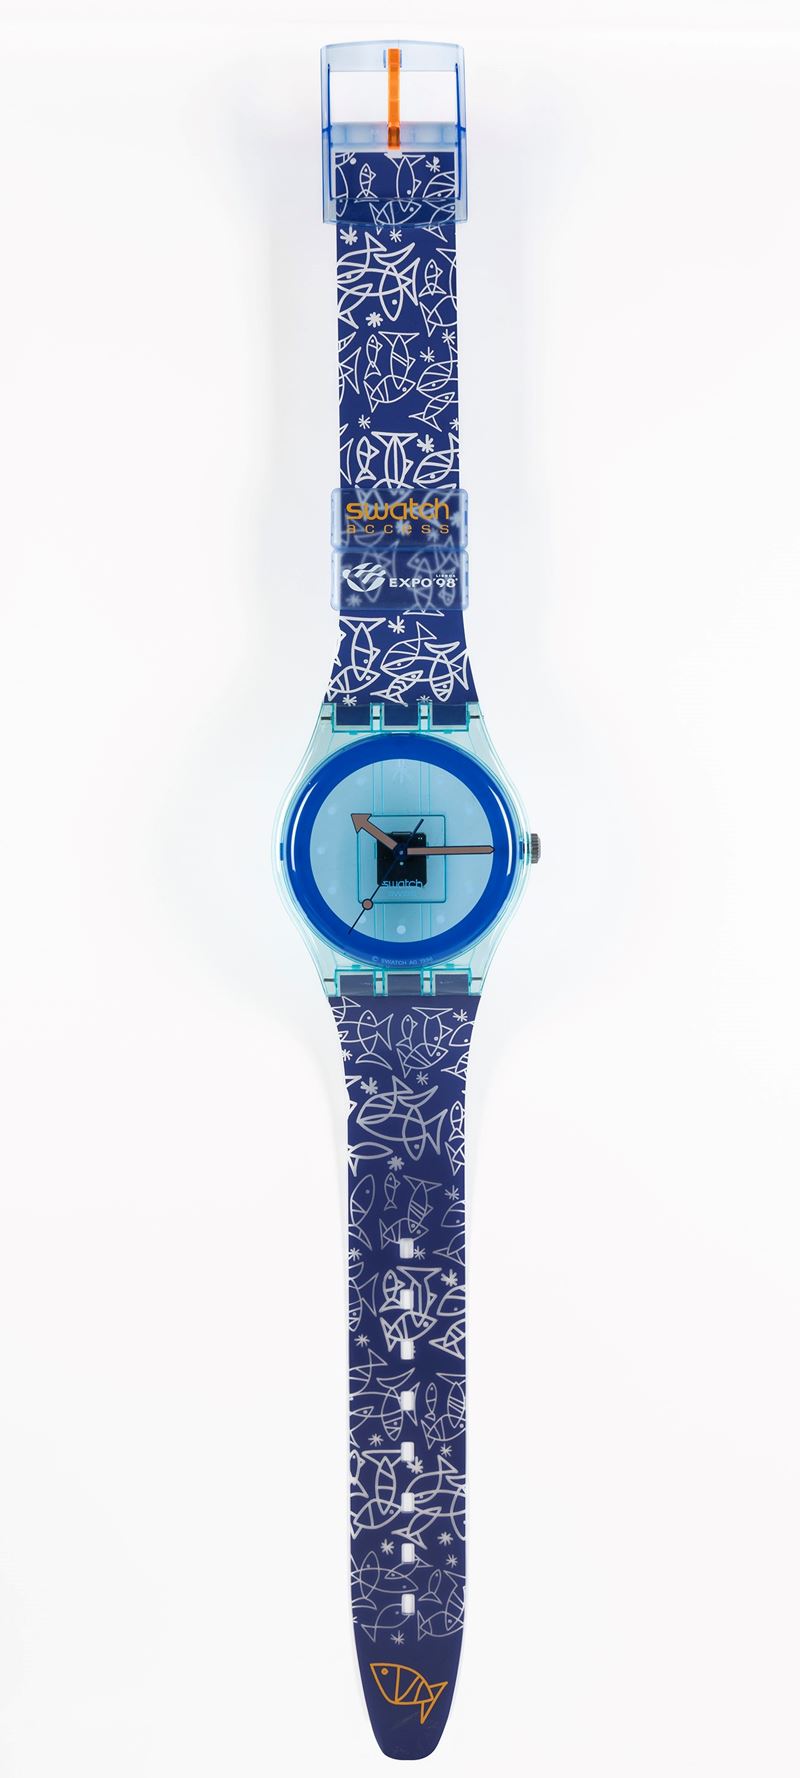 Swatch - Maxi wall clock - Access Special Expo '98 (MSKL100) | Swatch ...